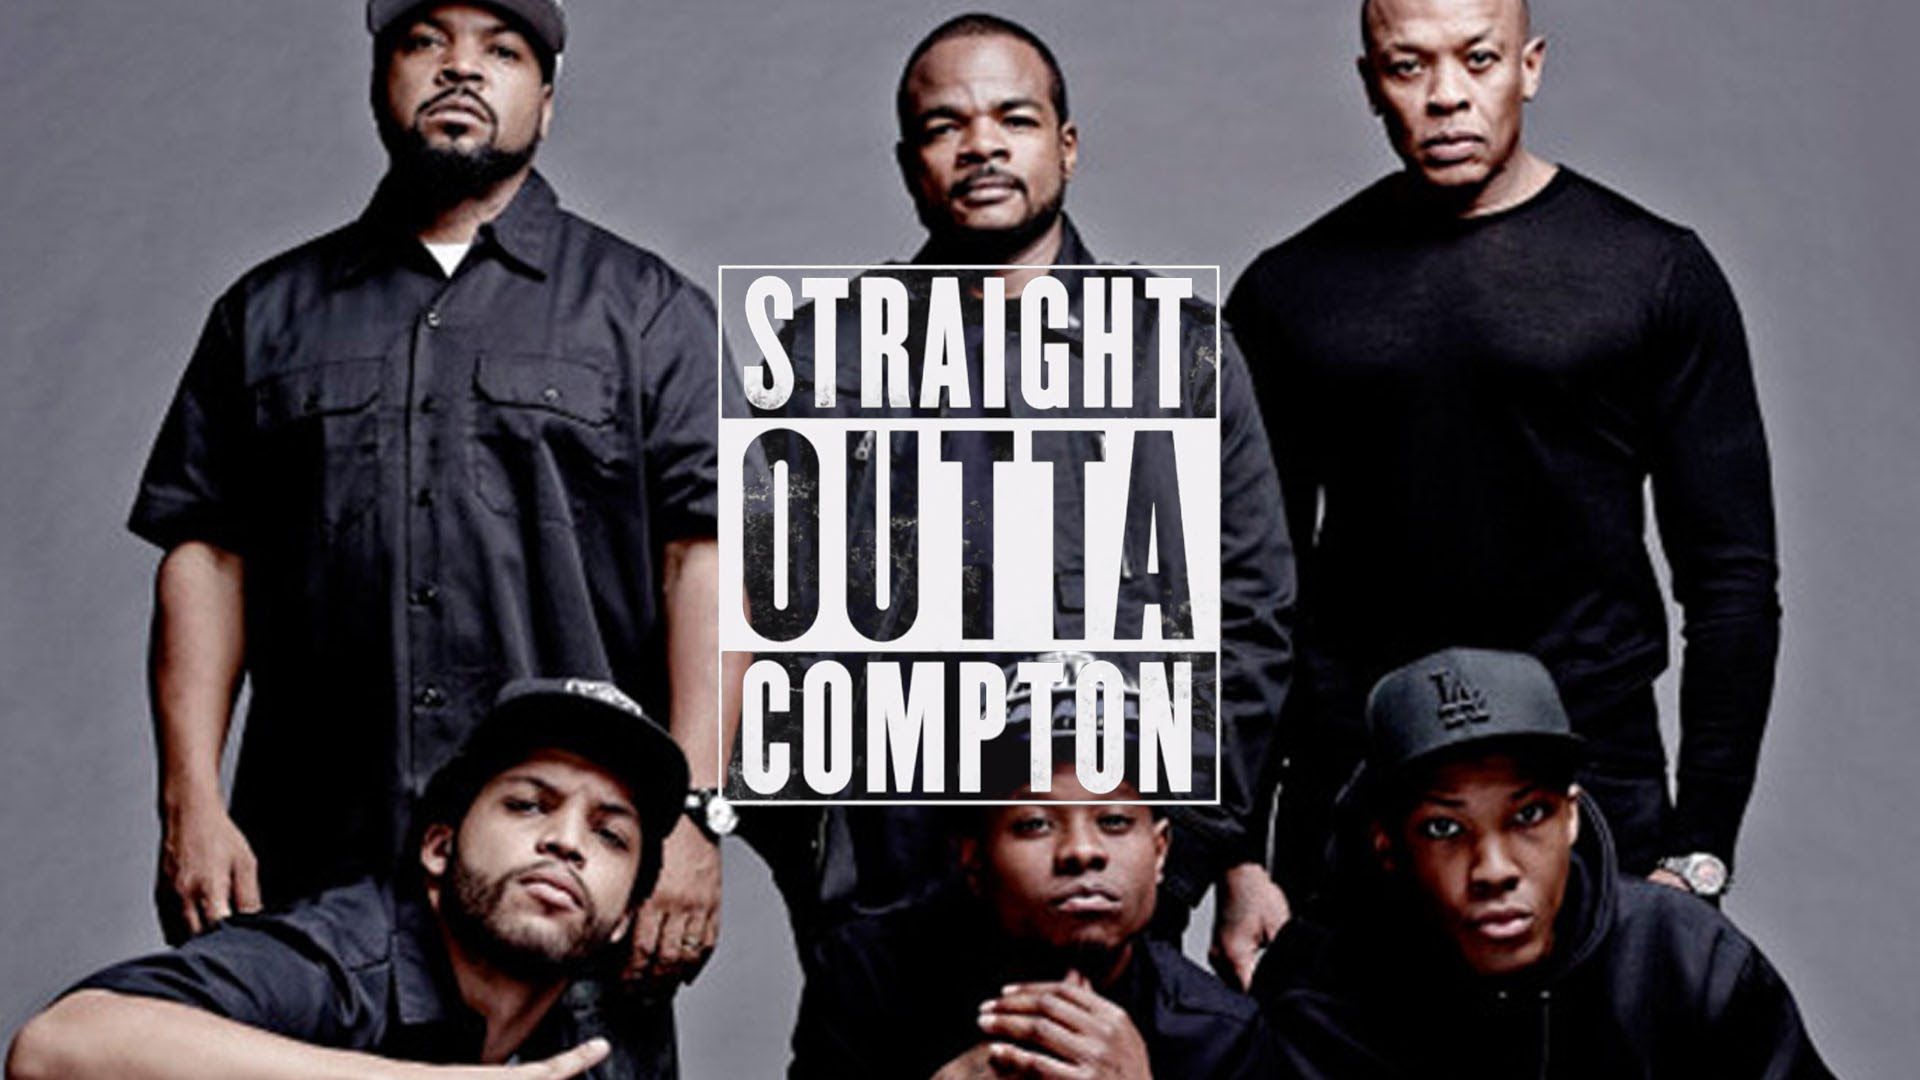 straight outta compton full movie free download no sign up